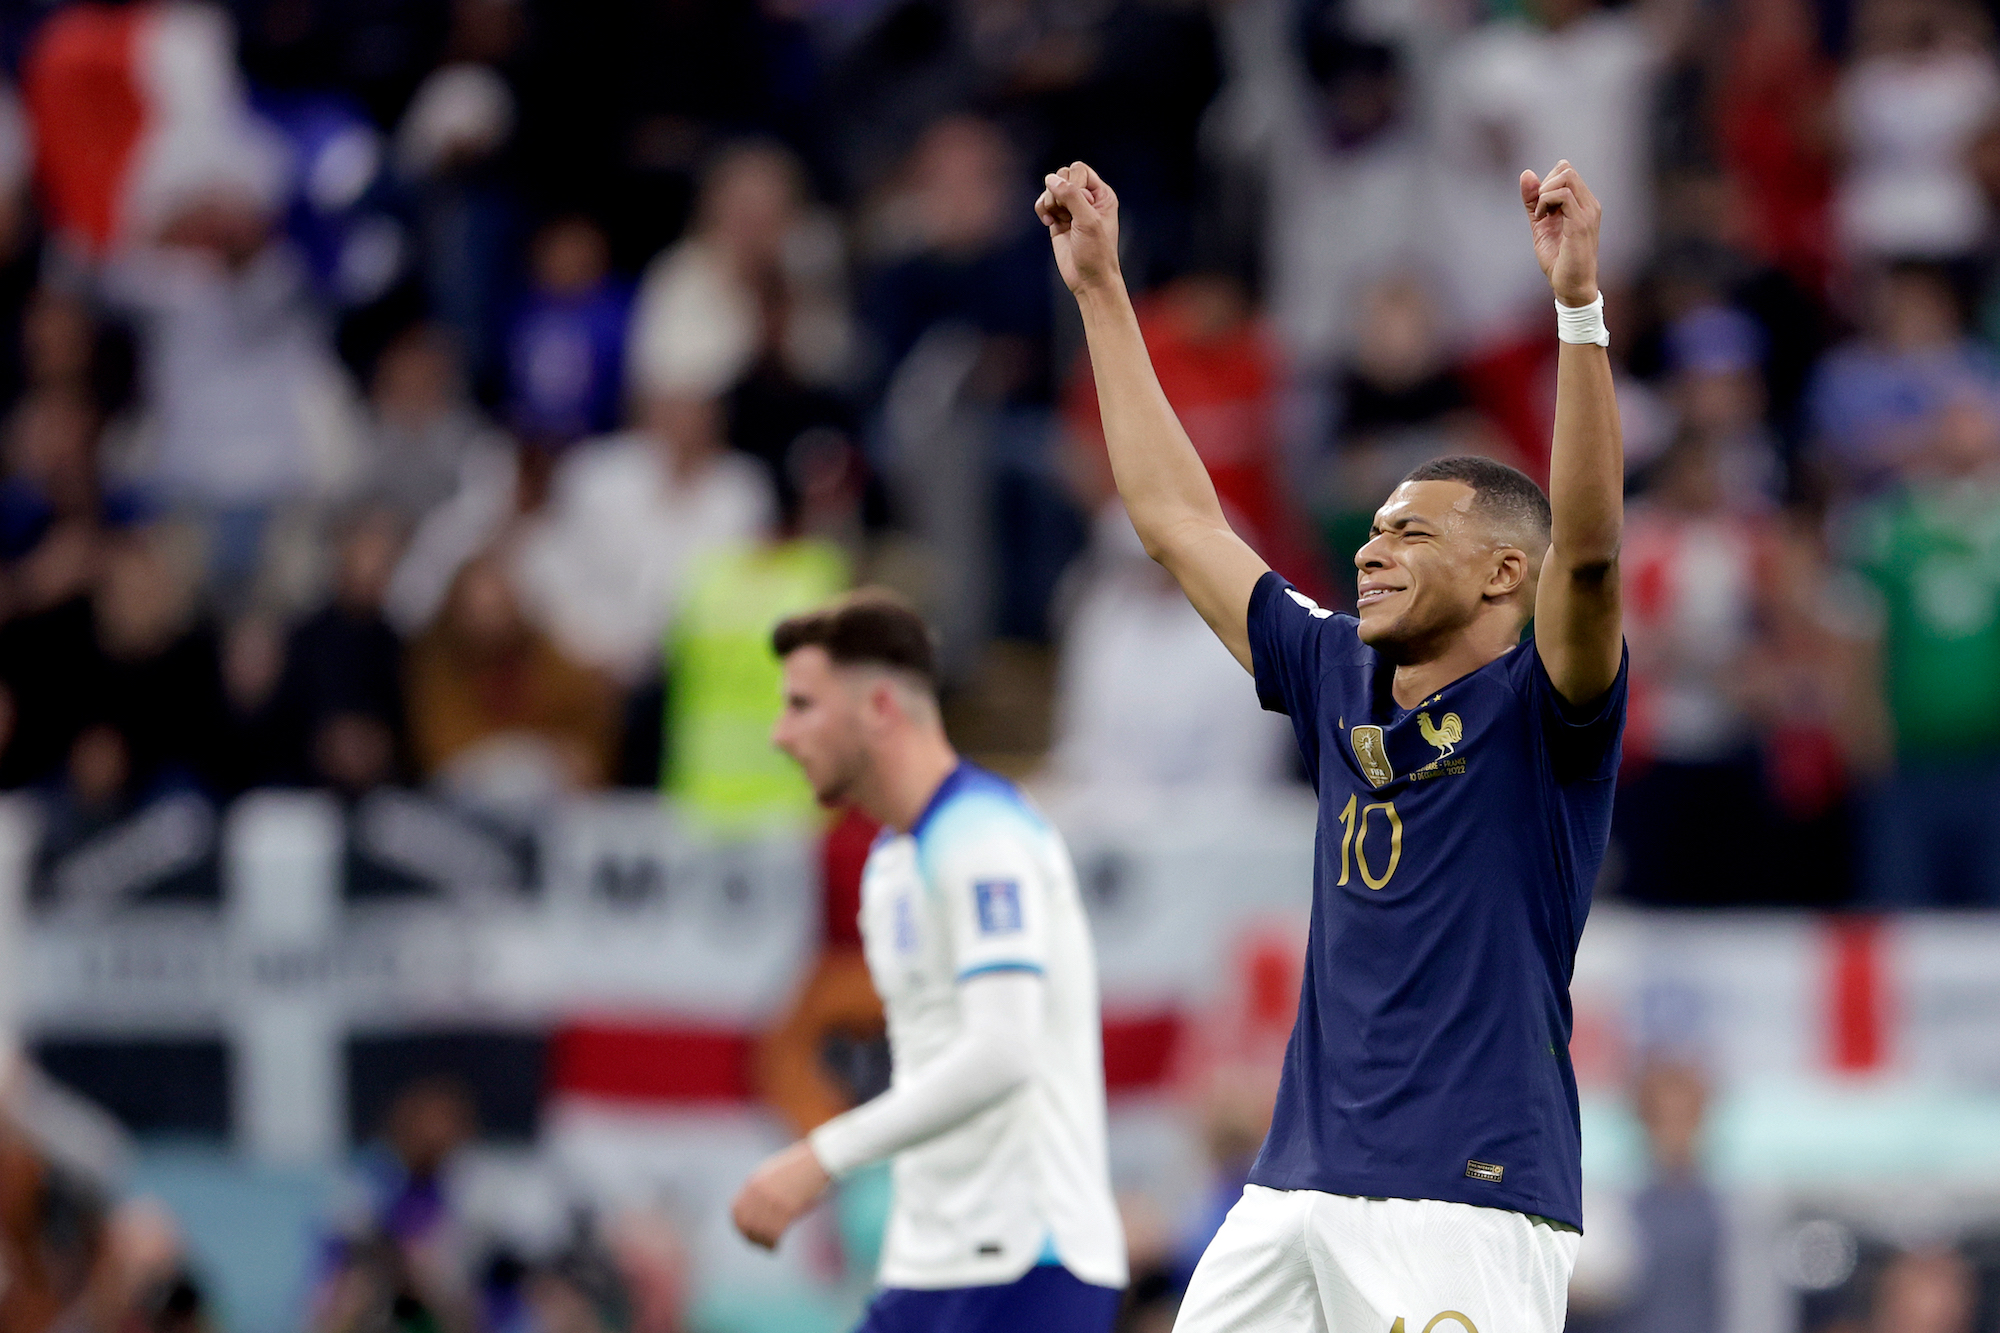 Kylian Mbappé celebrates after the final whistle.